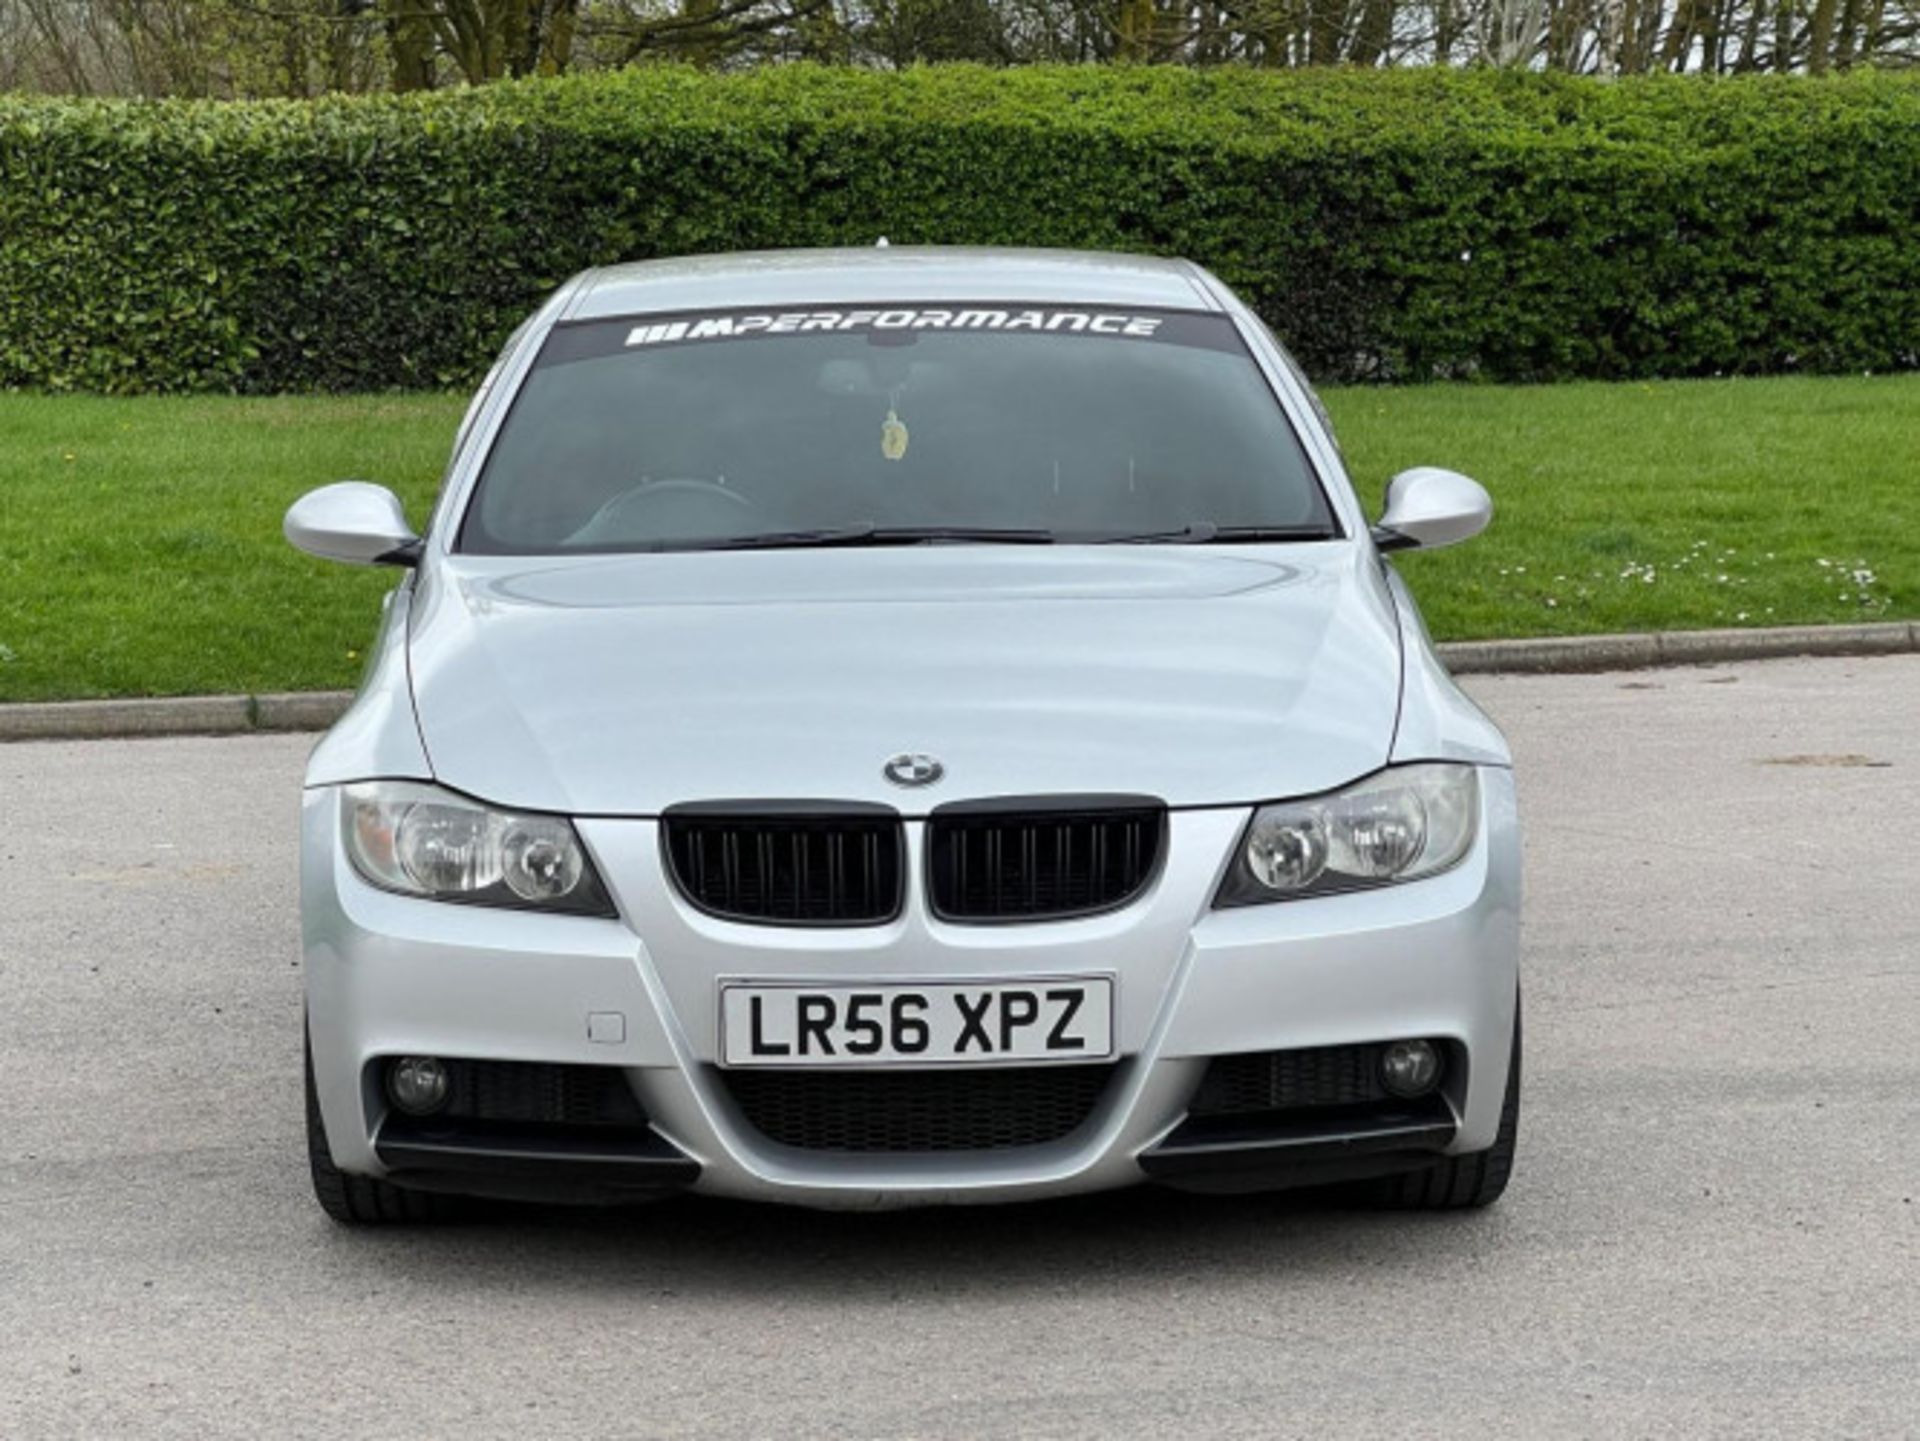 LUXURIOUS PERFORMANCE: 2006 BMW 3 SERIES 2.0 320D M SPORT AUTOMATIC >>--NO VAT ON HAMMER--<< - Image 11 of 98